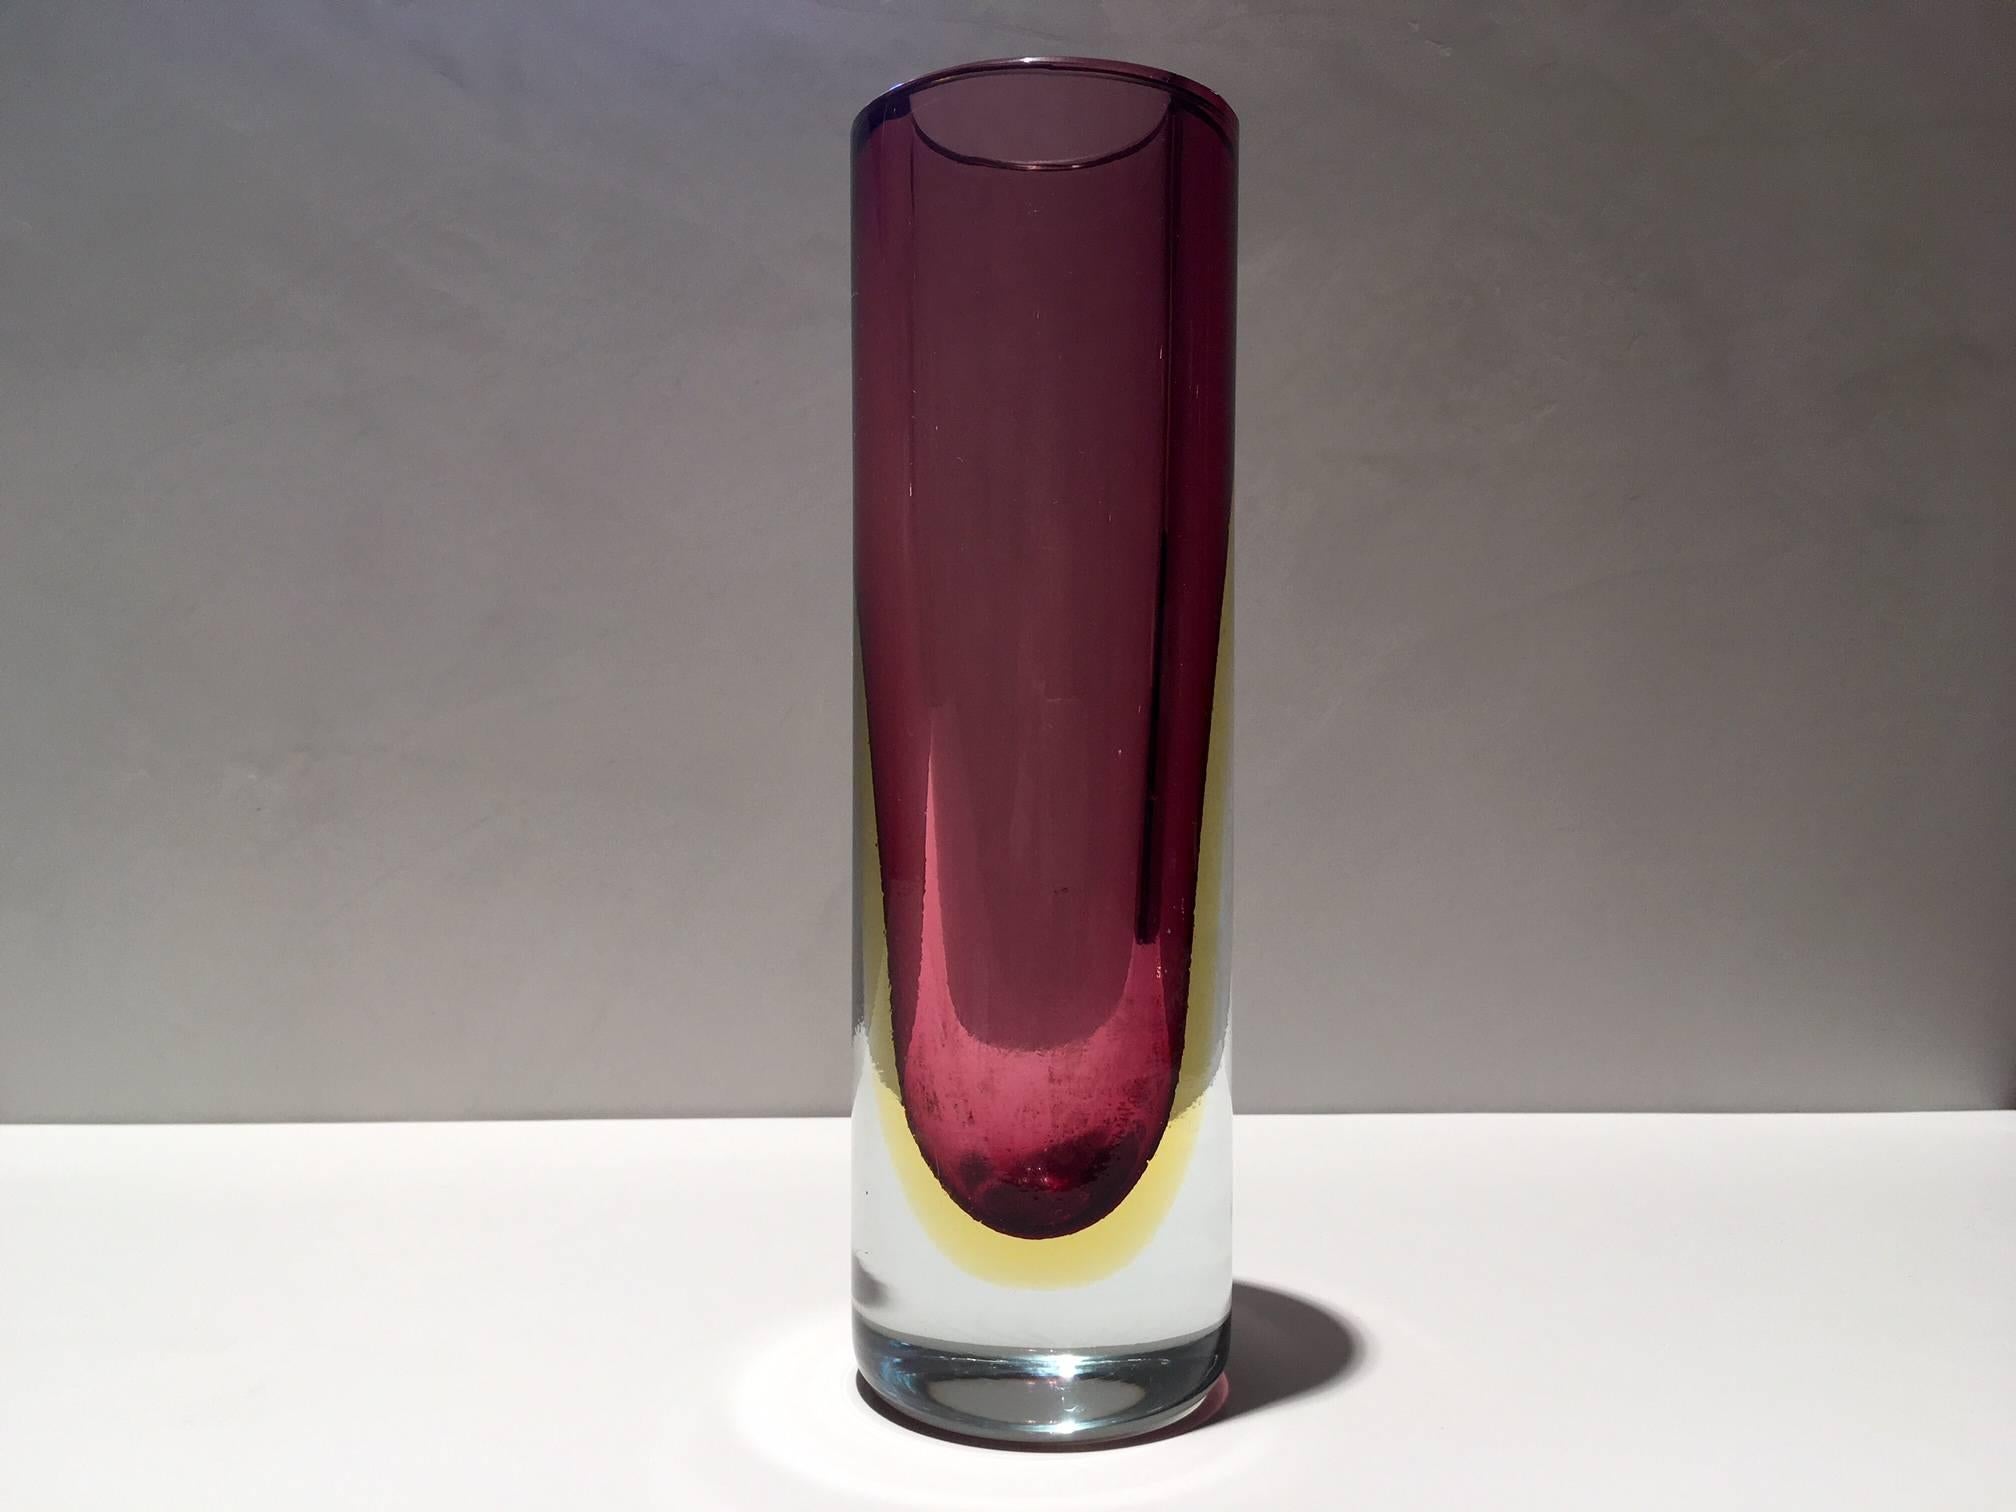 Gorgeous mid-20th century Italian Murano glass vase attributed to Flavio Poli. Stunning color combination of pink and yellow using Sommerso technique.